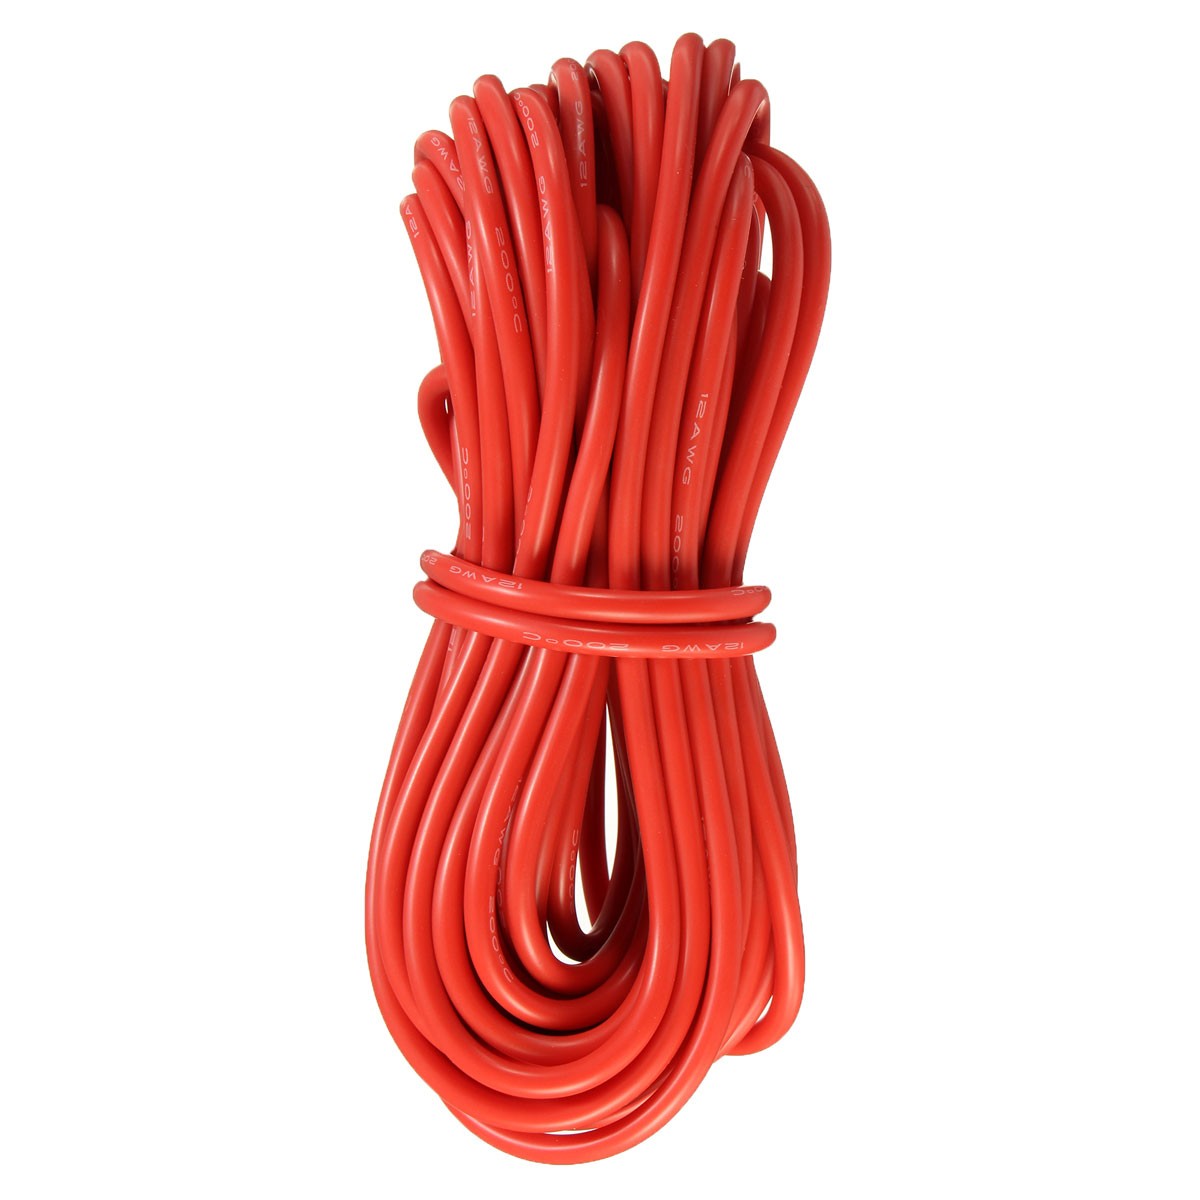 DANIU-10-Meter-Red-Silicone-Wire-Cable-10121416182022AWG-Flexible-Cable-1170297-9